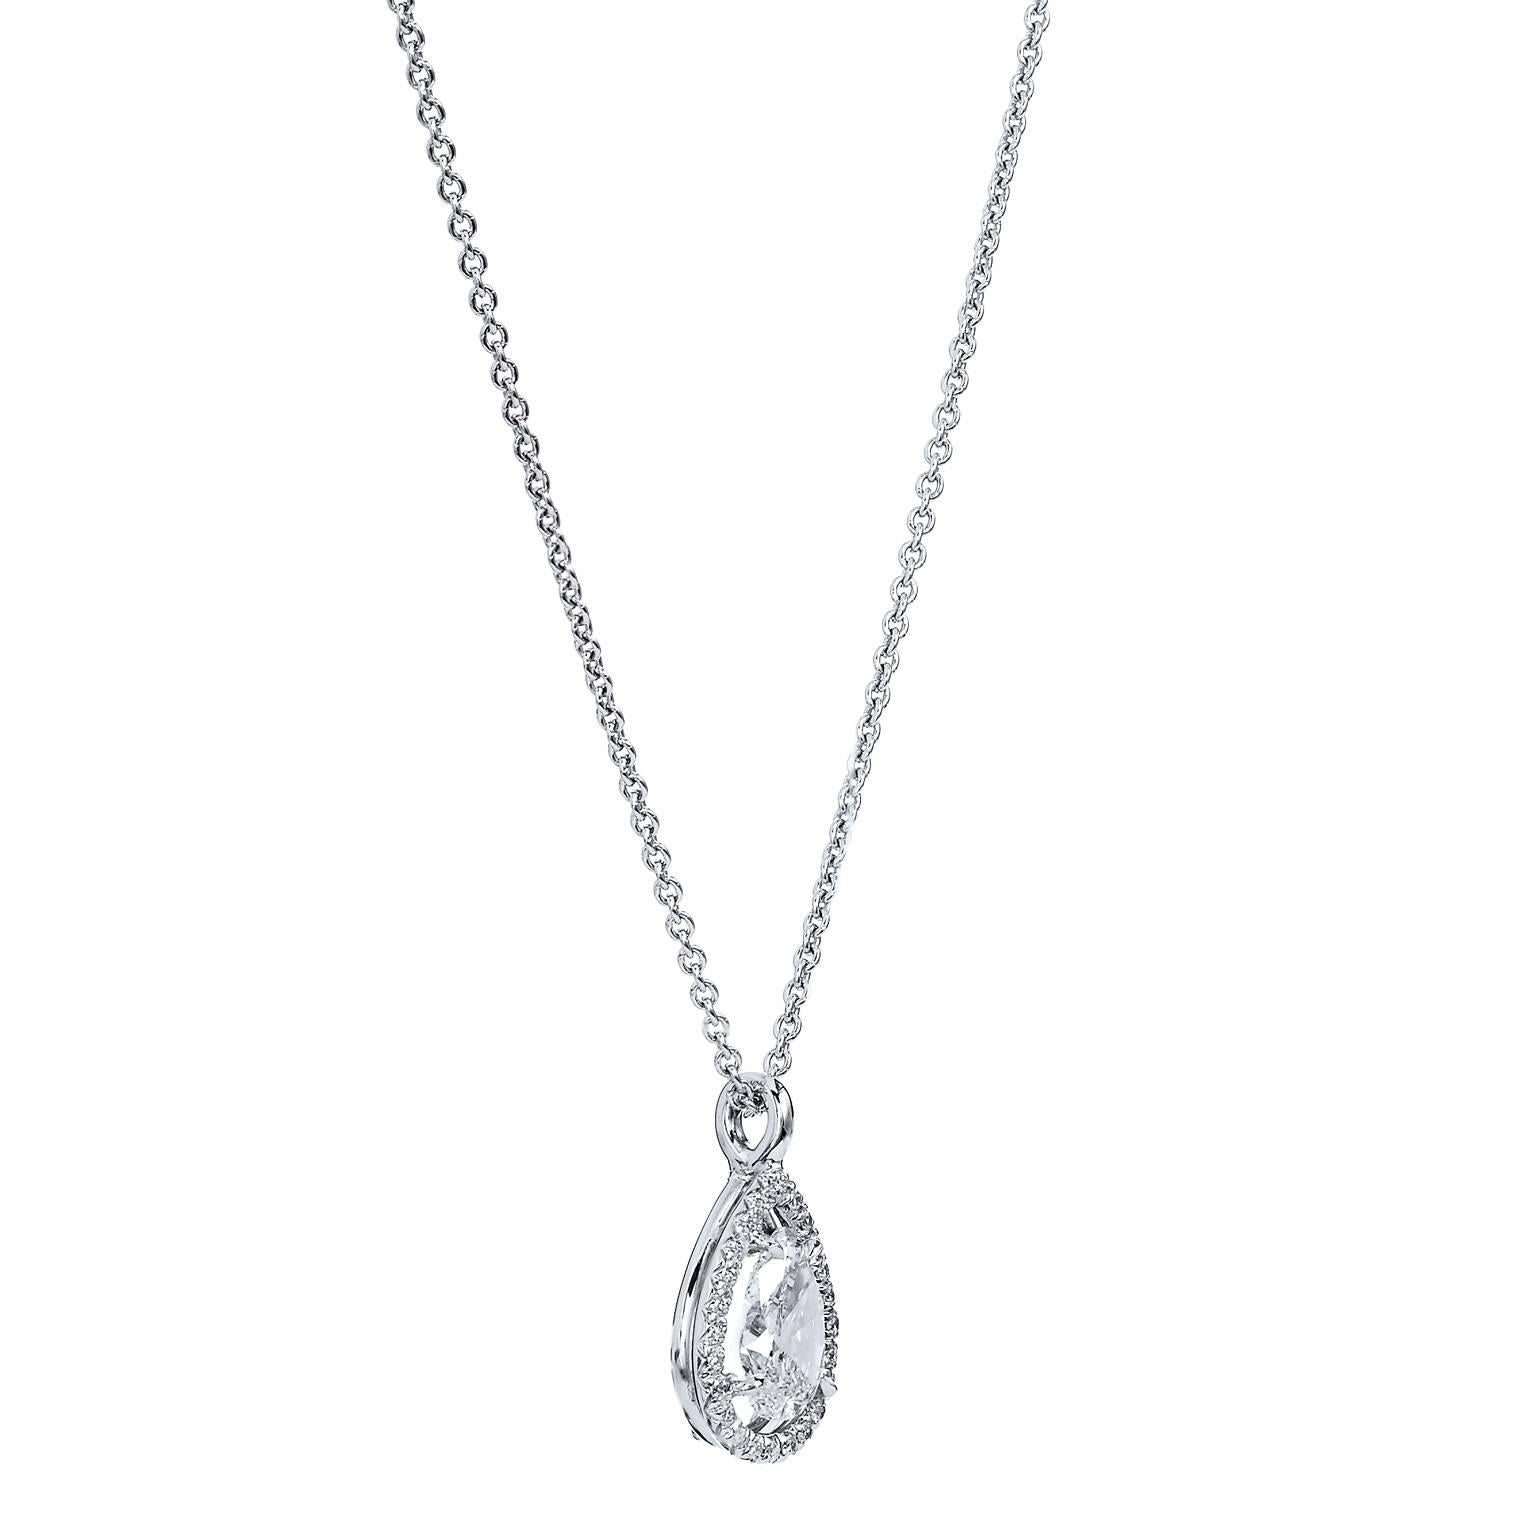 Femininity and refinement reign supreme in this handmade H and H 18 karat white gold and pear cut diamond pendant necklace. An impressive 1.21 carat diamond is set at center in four prong setting (I/VS2; GIA#2175400714). To further enhance this